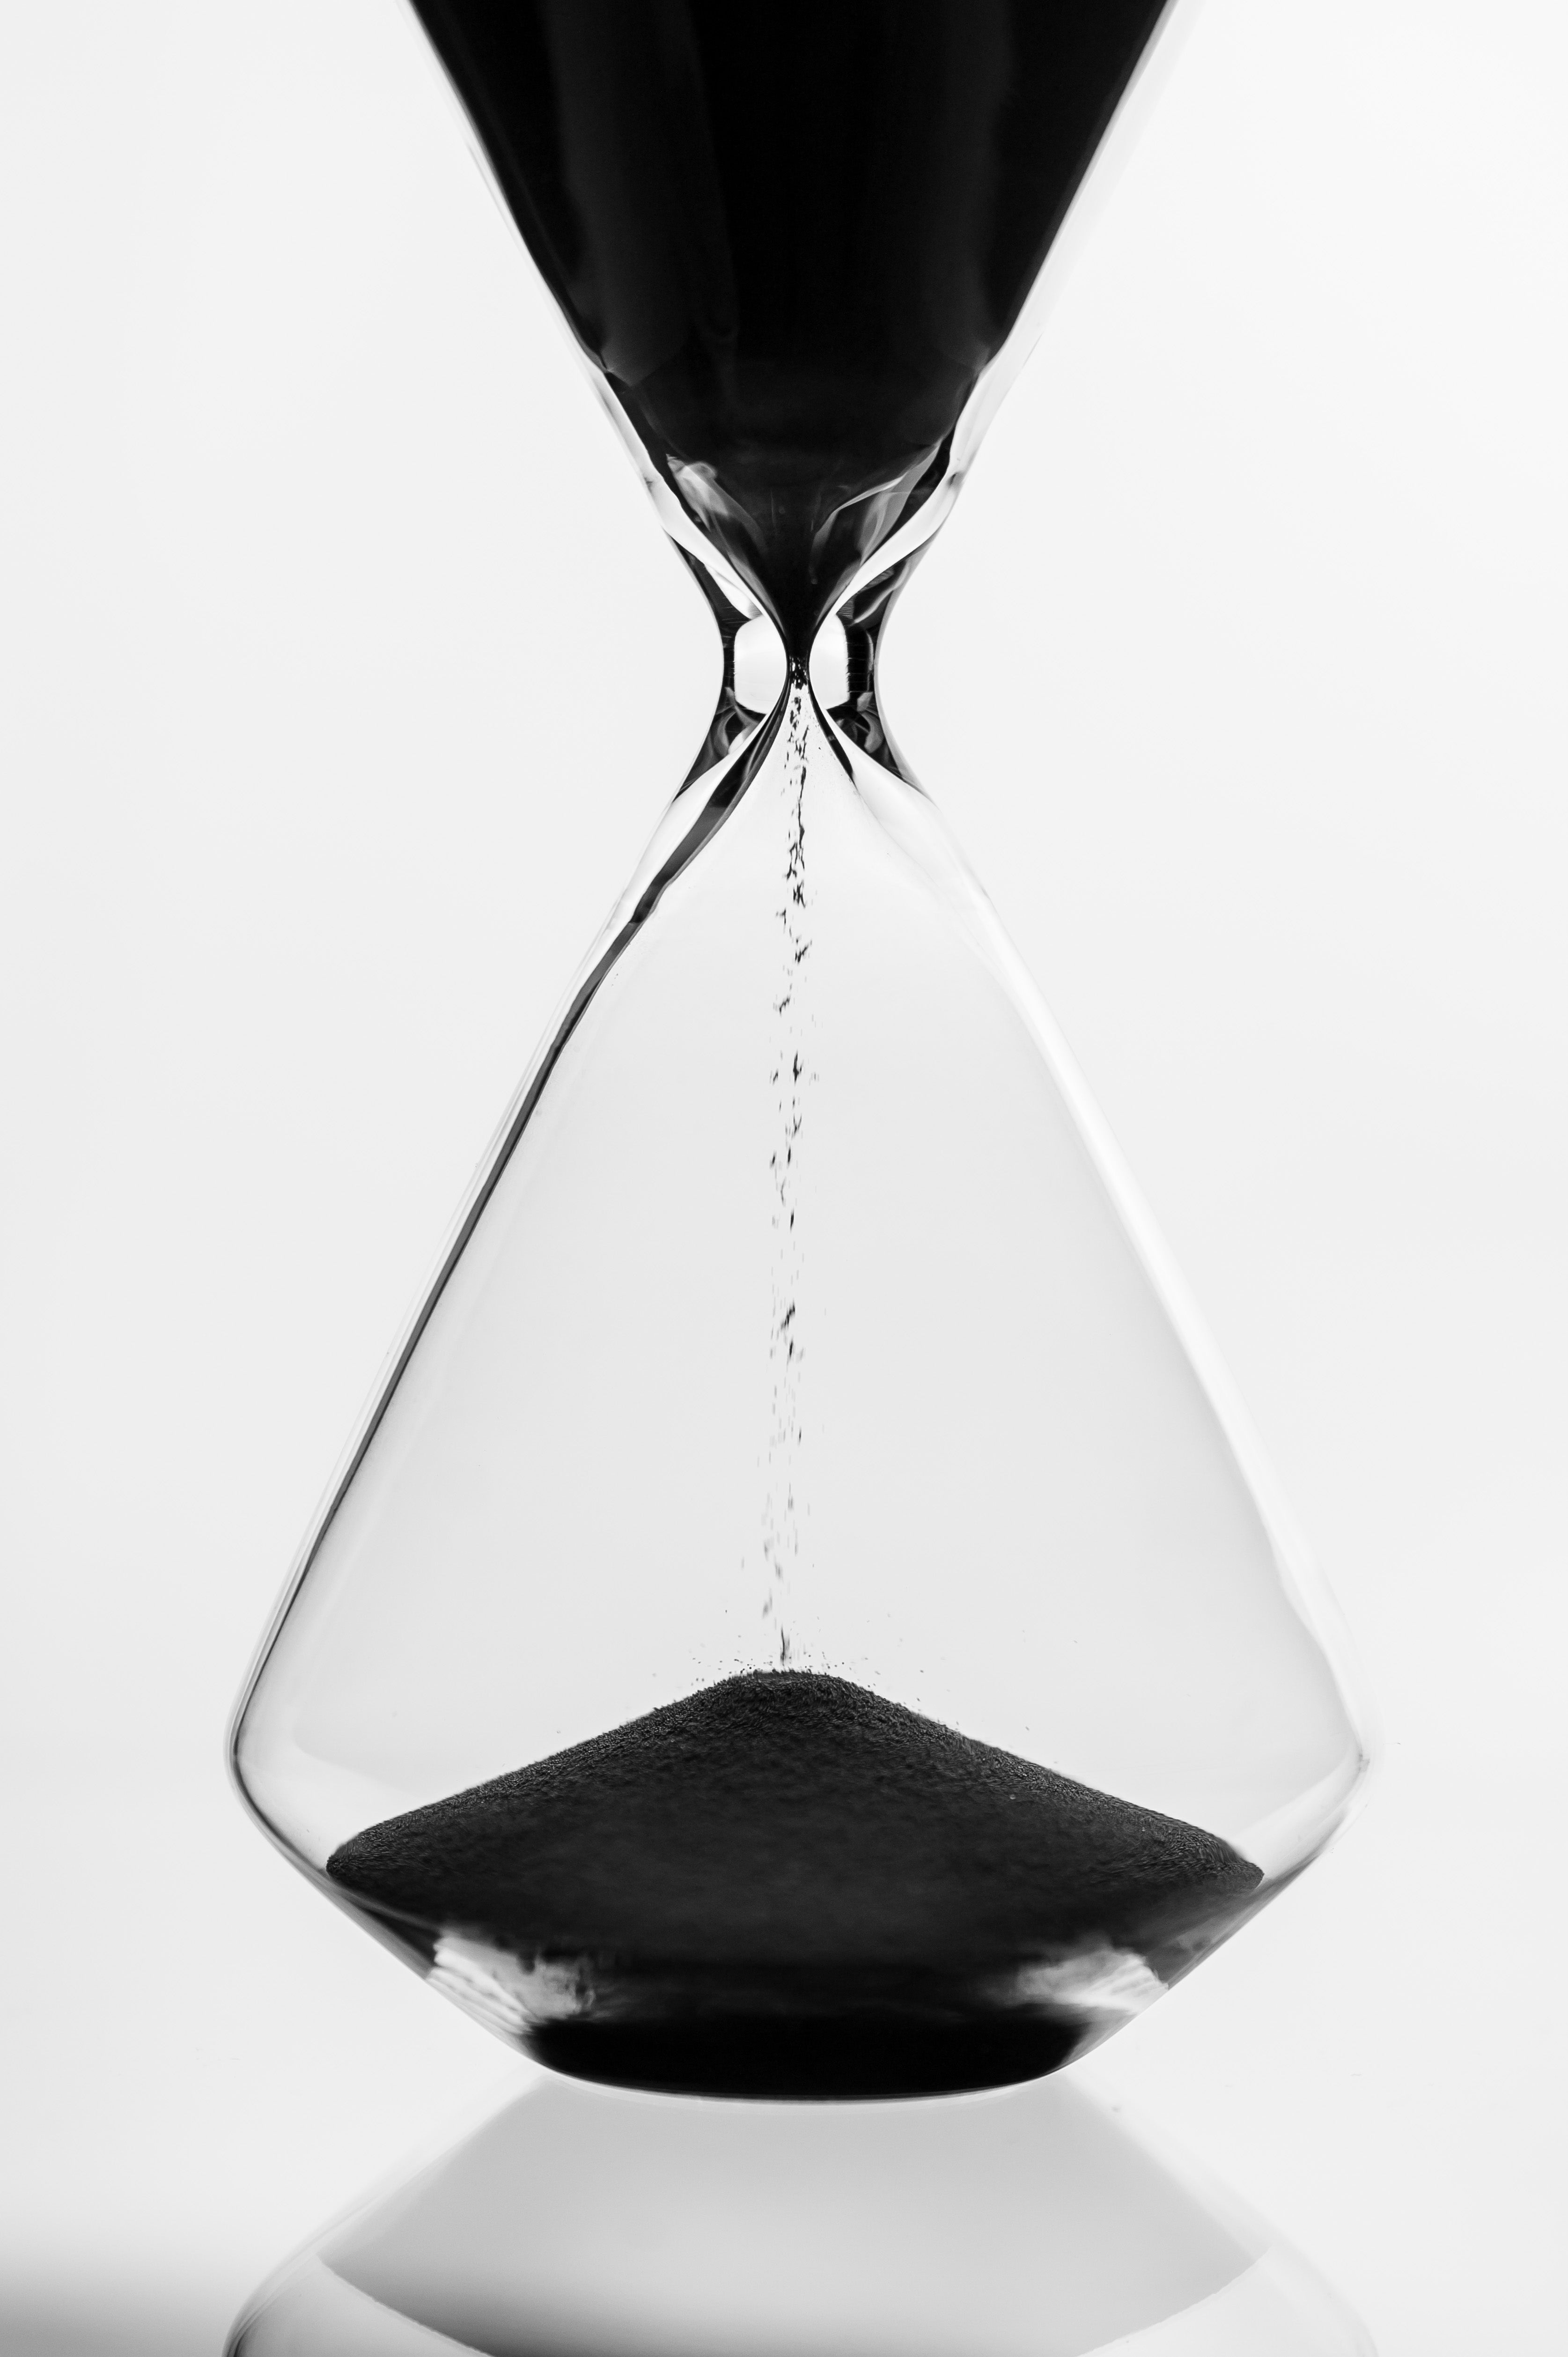 hour glass, sand dripping